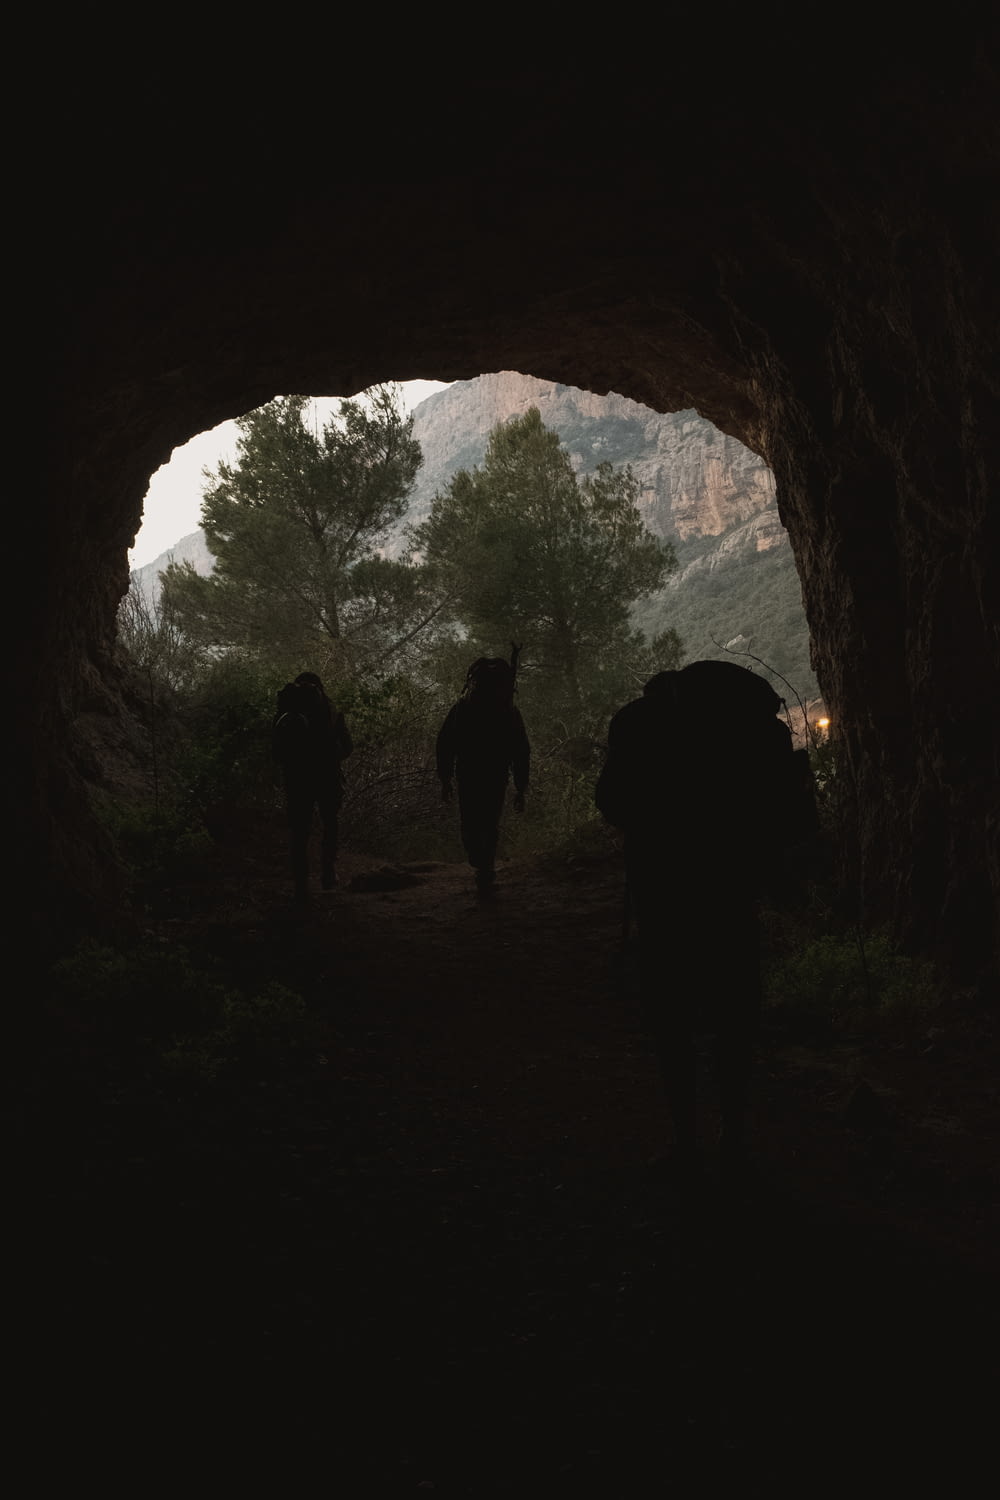 silhouette of 2 person standing inside cave during daytime